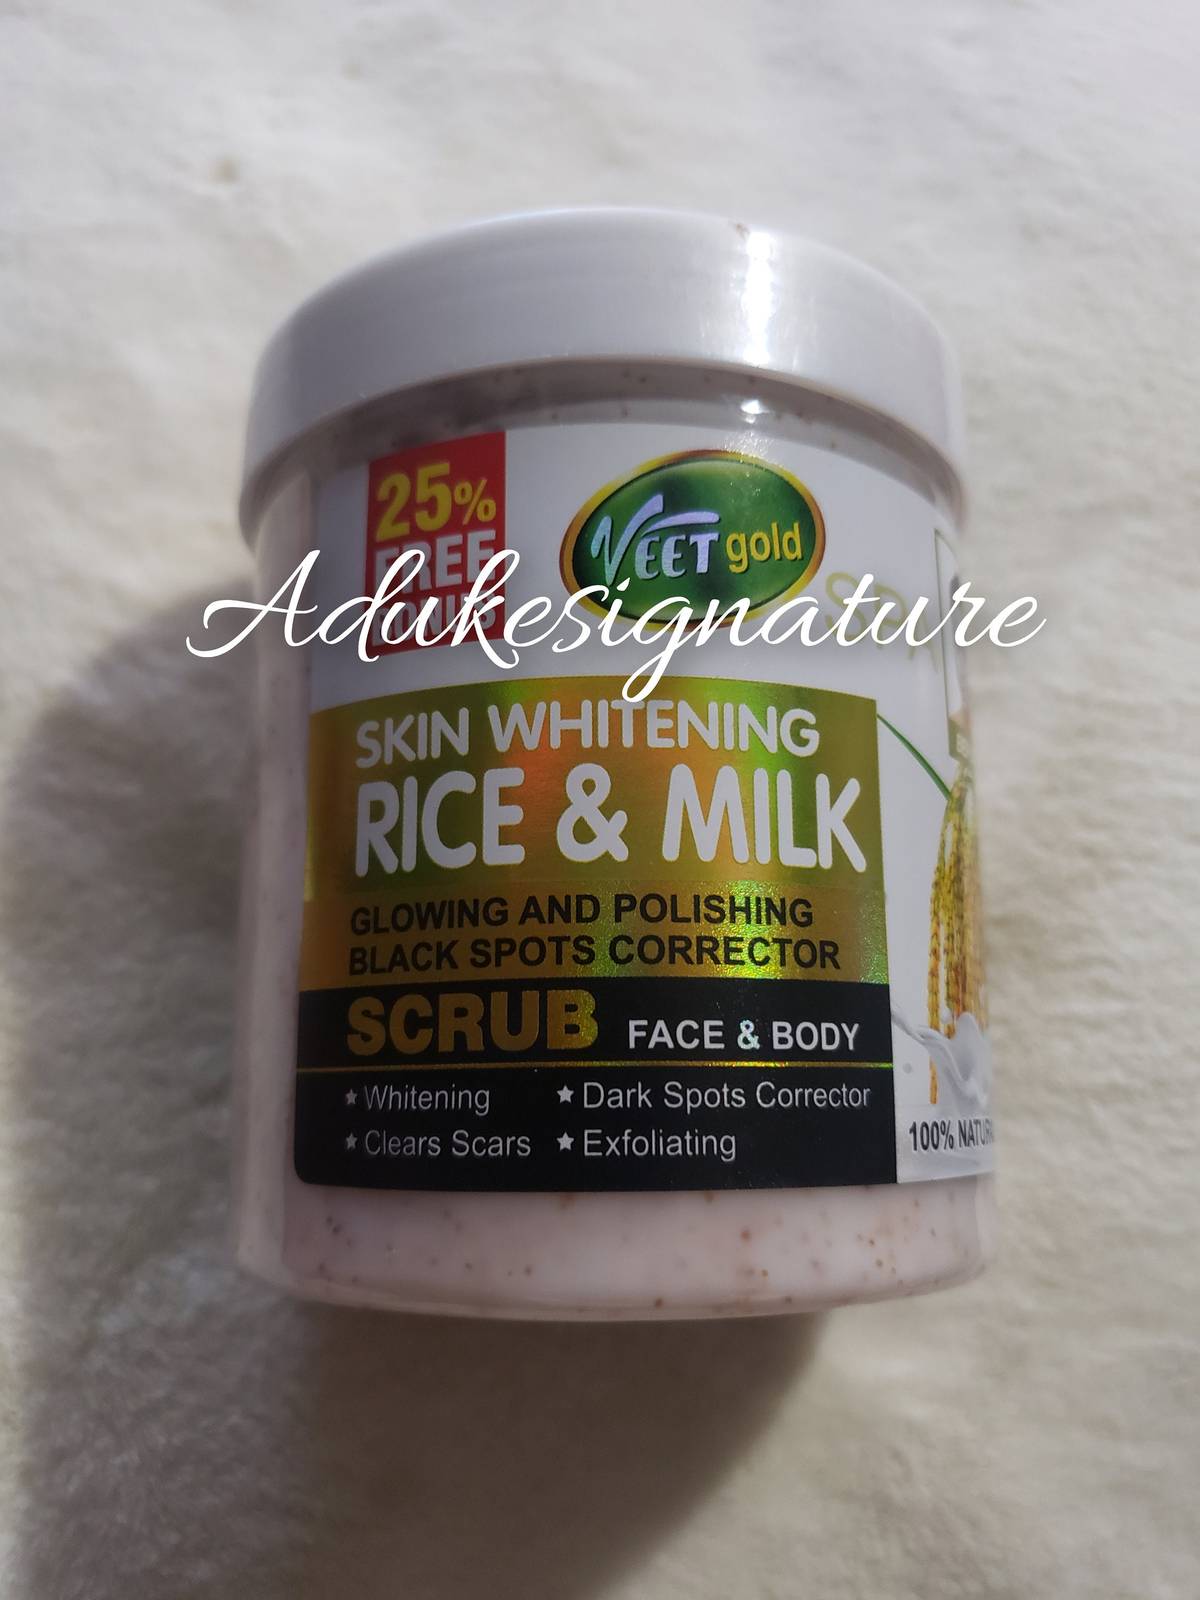 Veet gold skin whitening rice and milk black spots corrector face and body scrub